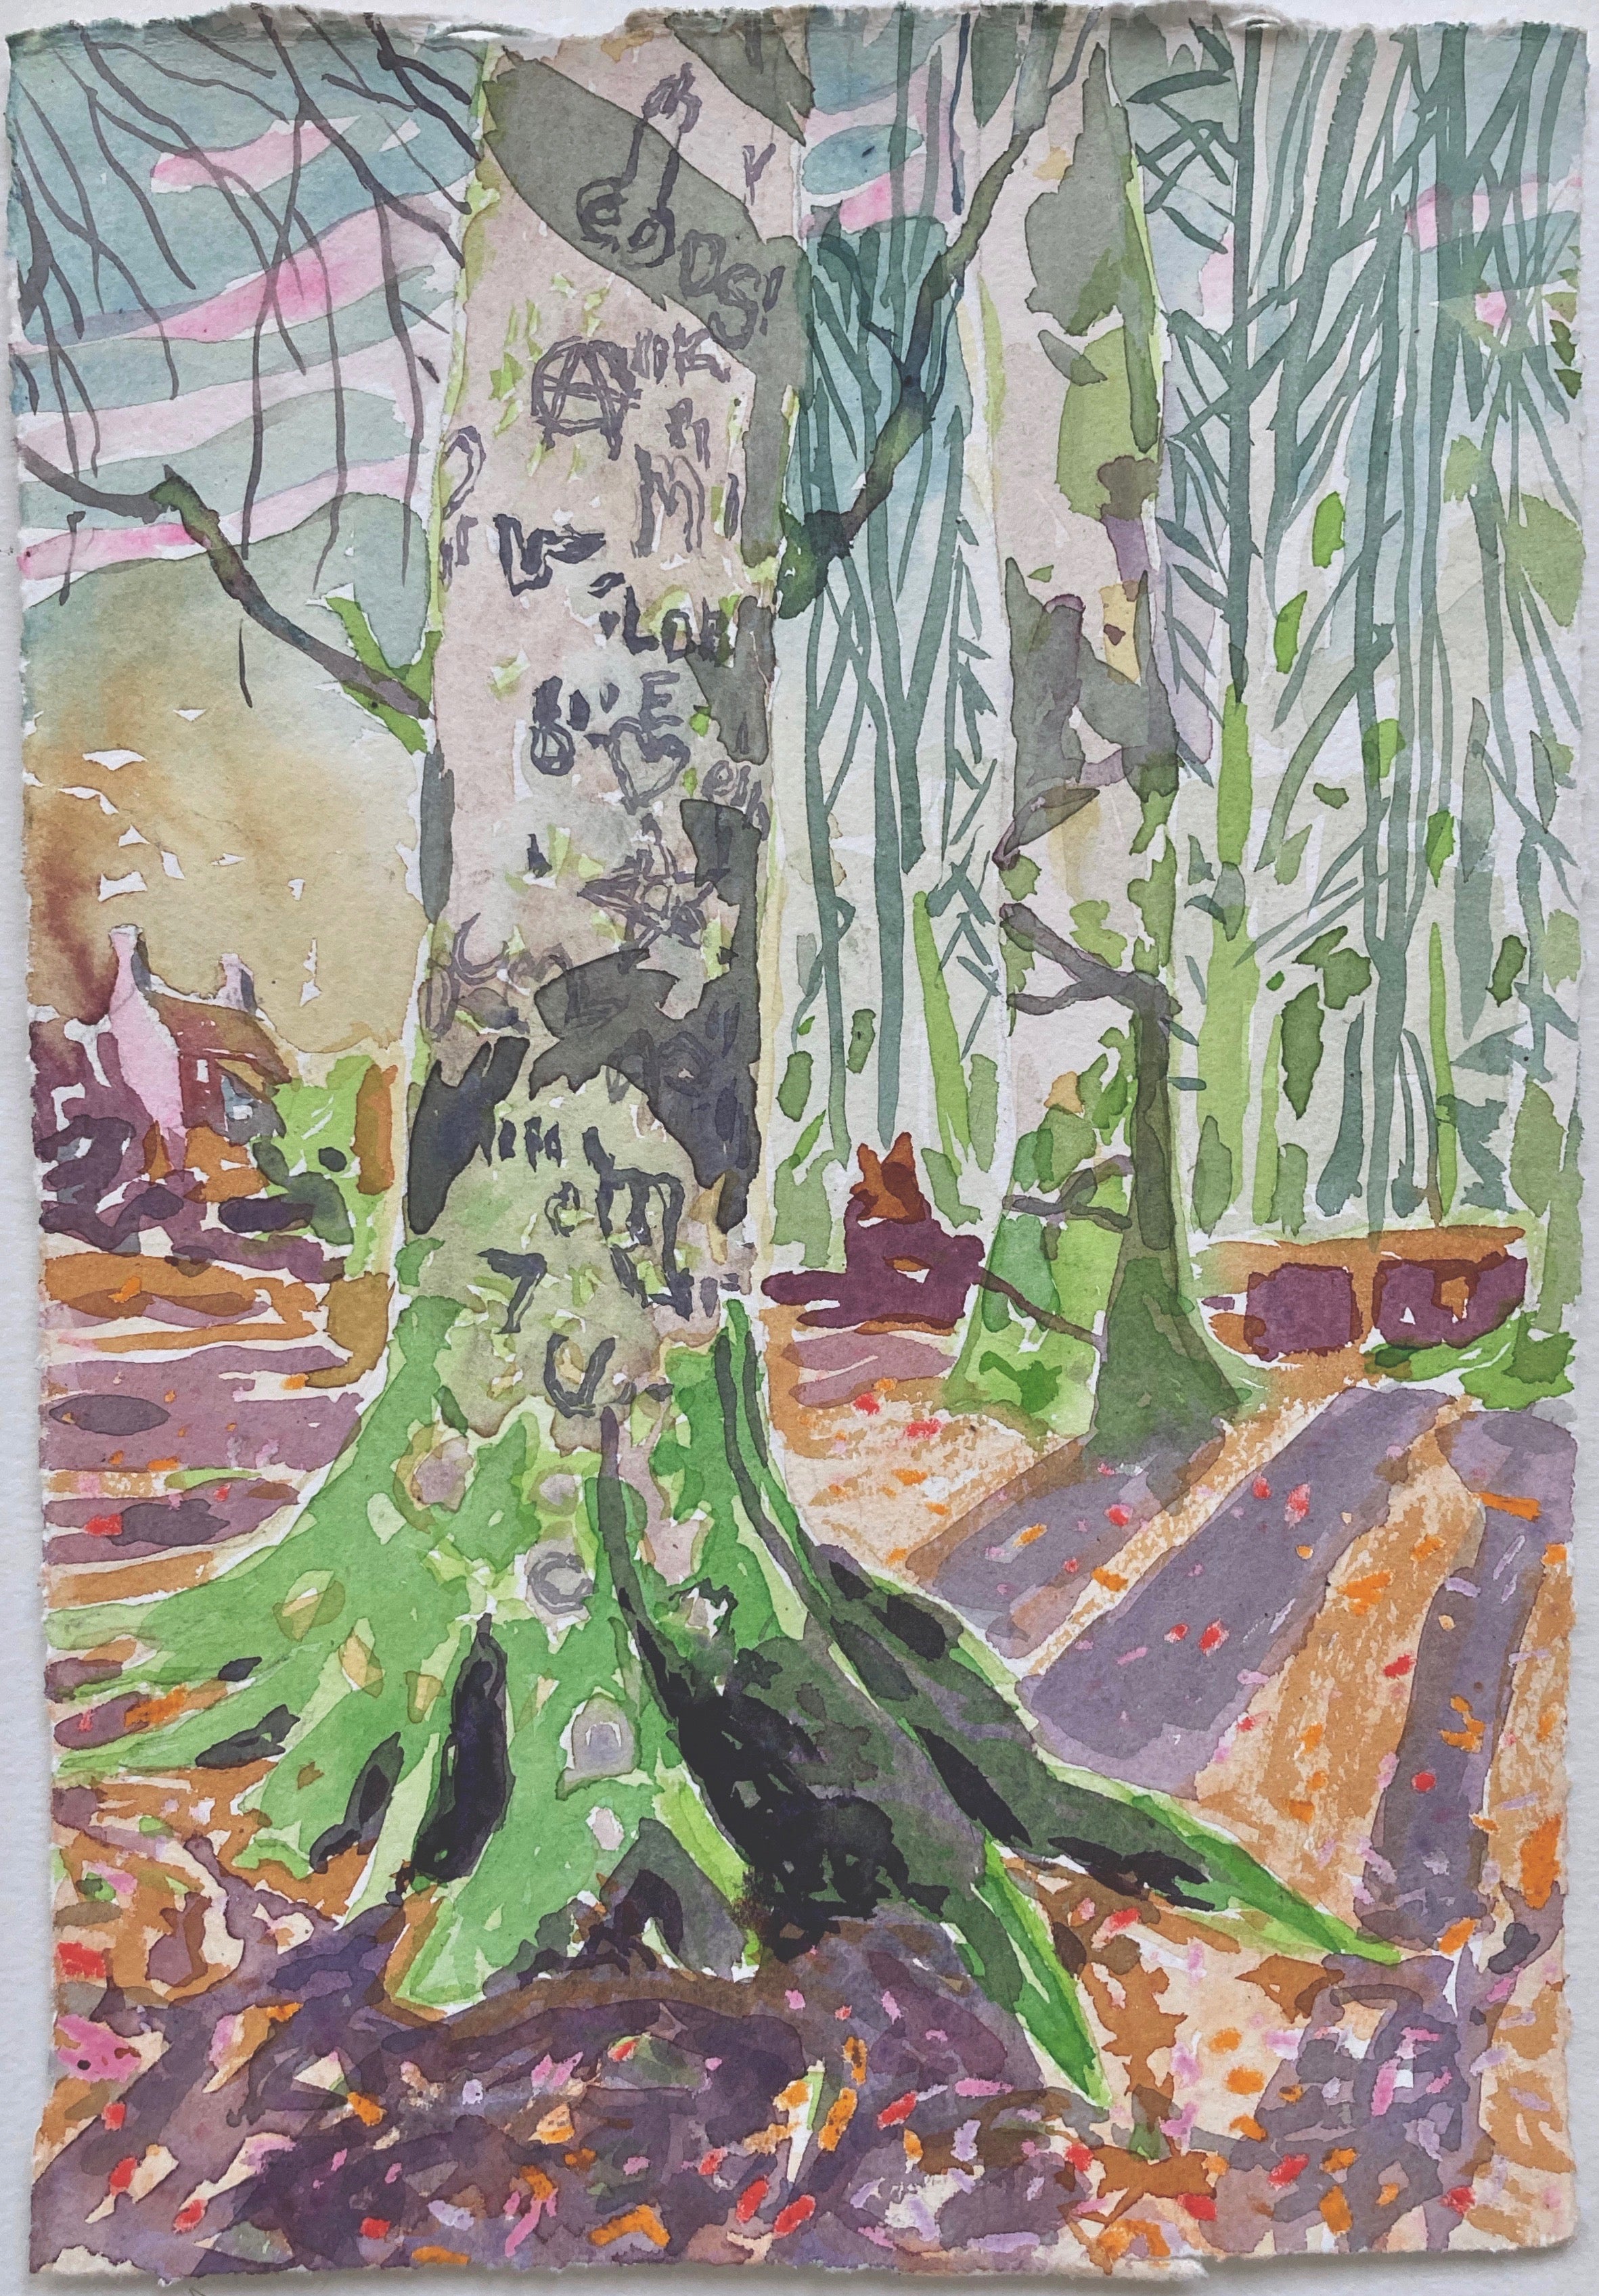 Dominic Shepherd 'The Woodlanders', 2021 Watercolour and oil pastel on paper 30x21cm